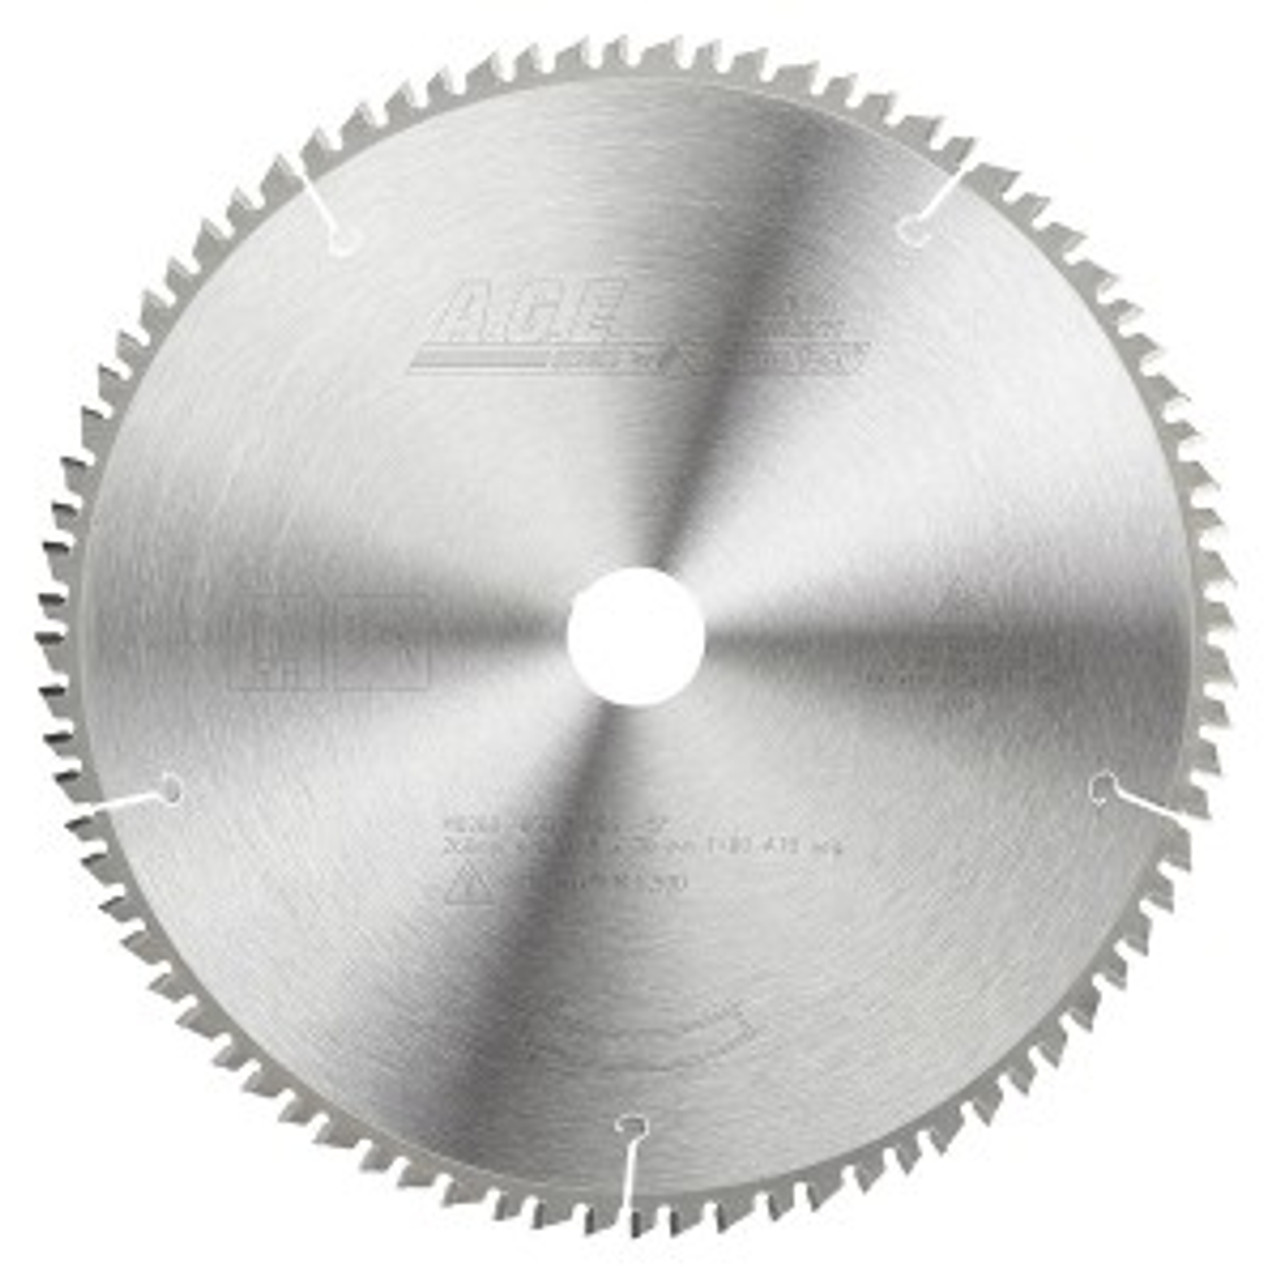 MD260-800 Carbide Tipped Saw Blade for Festool® and Other Track Saw Machines